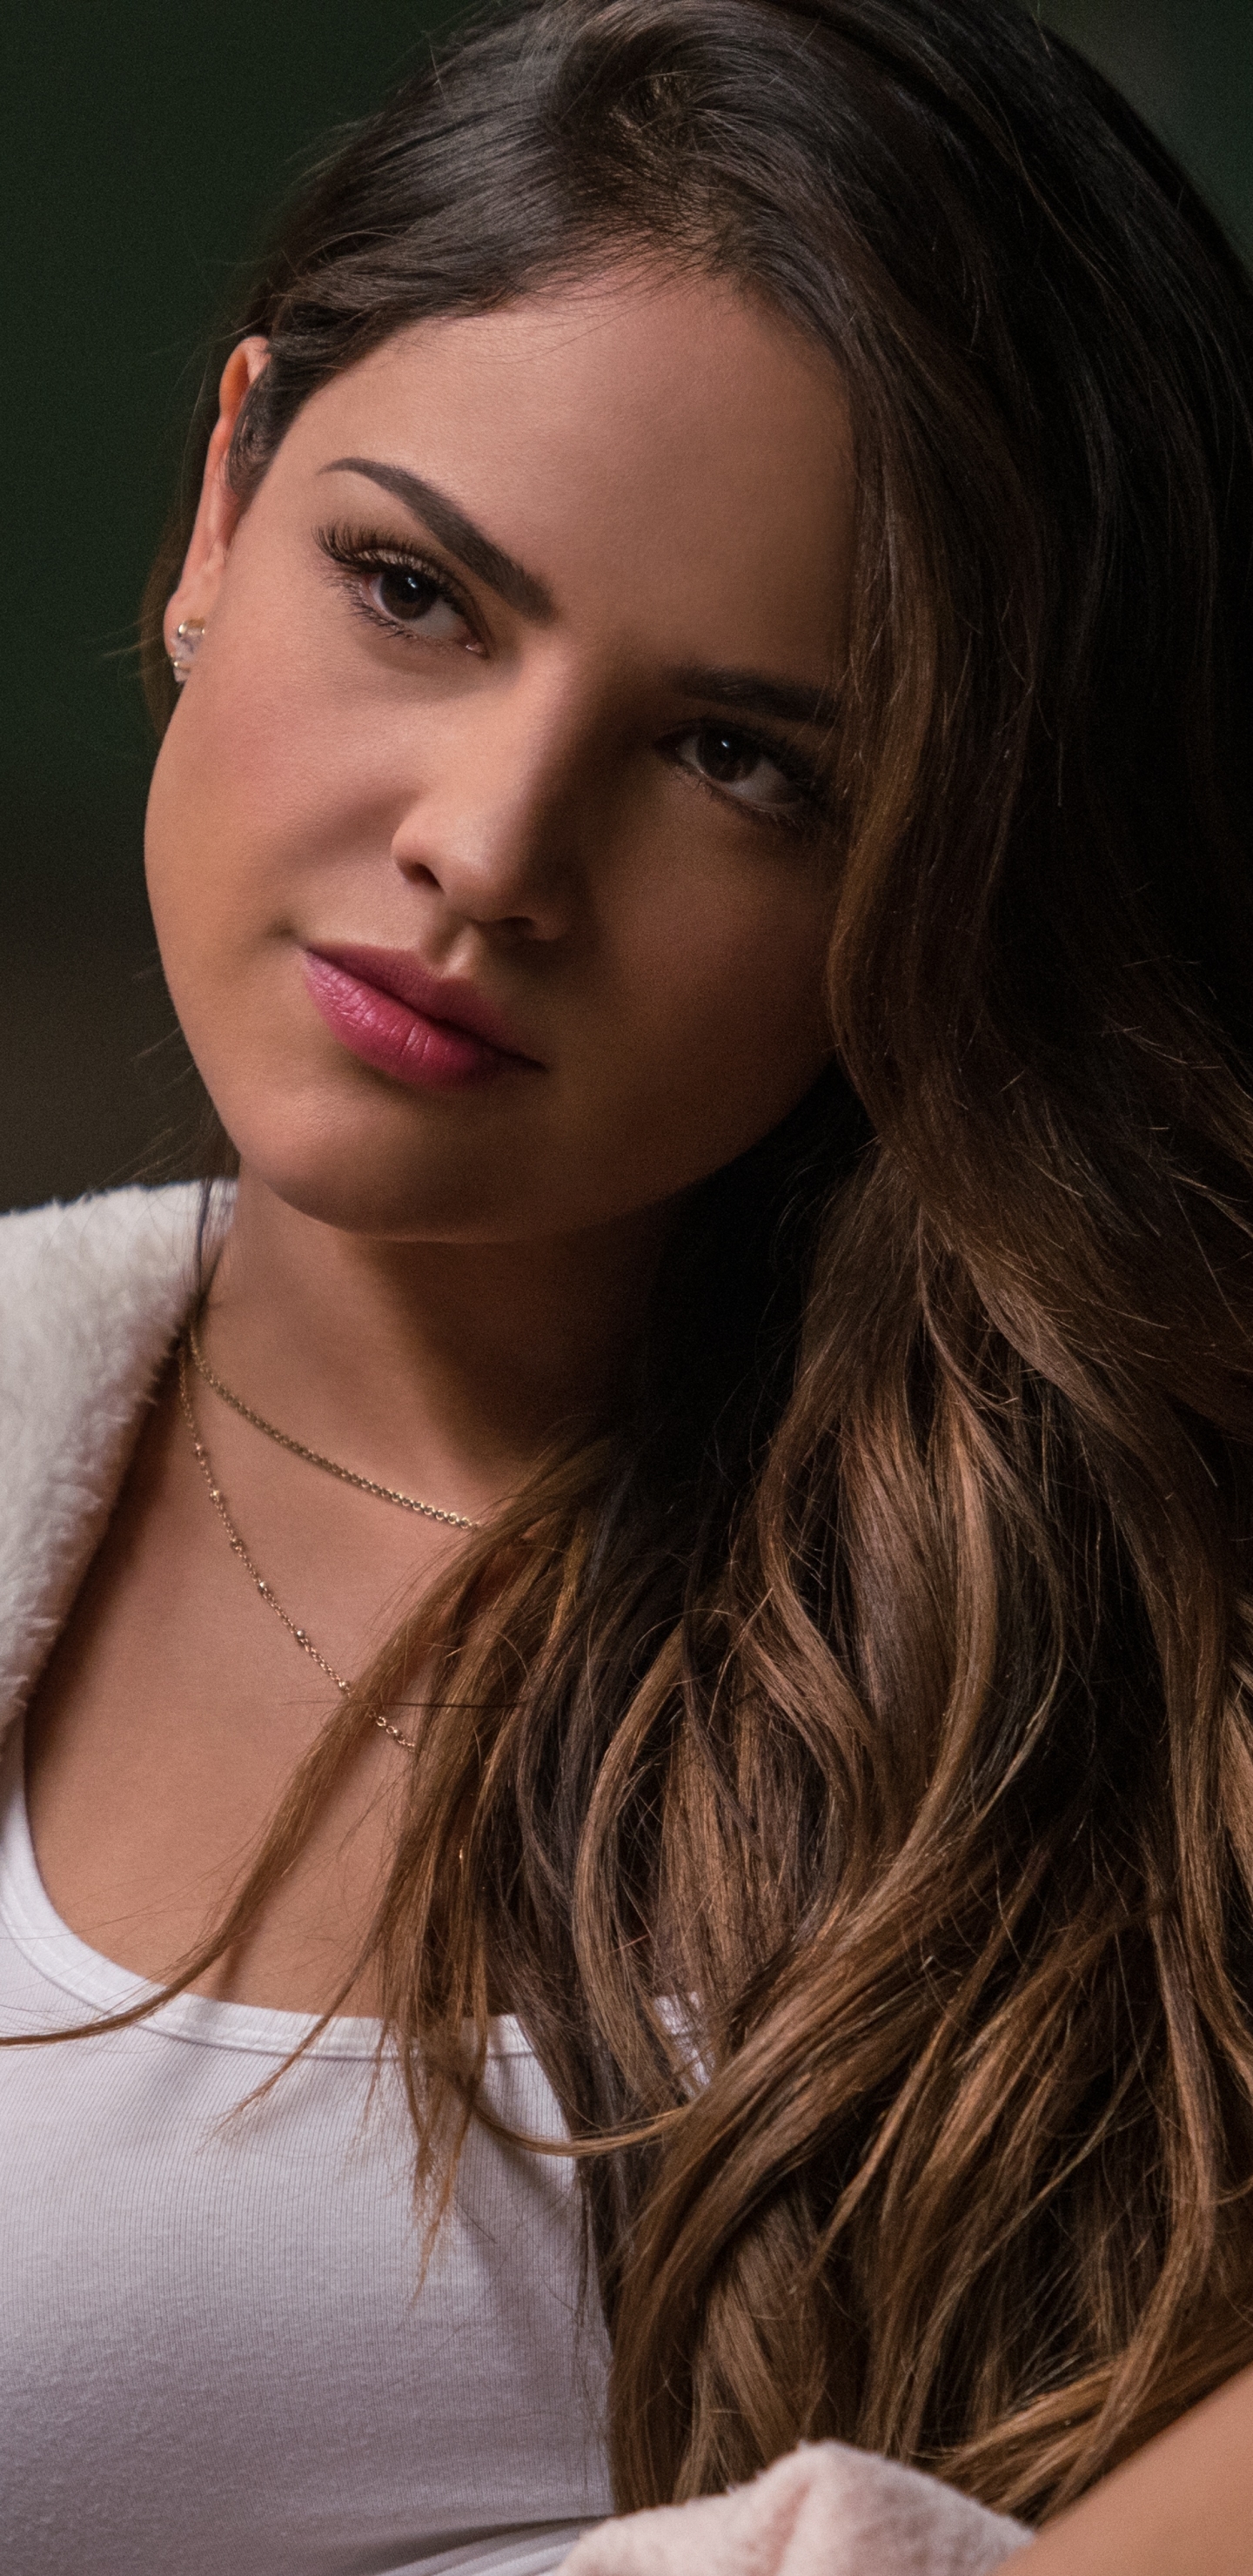 movie, baby driver, eiza gonzalez for android